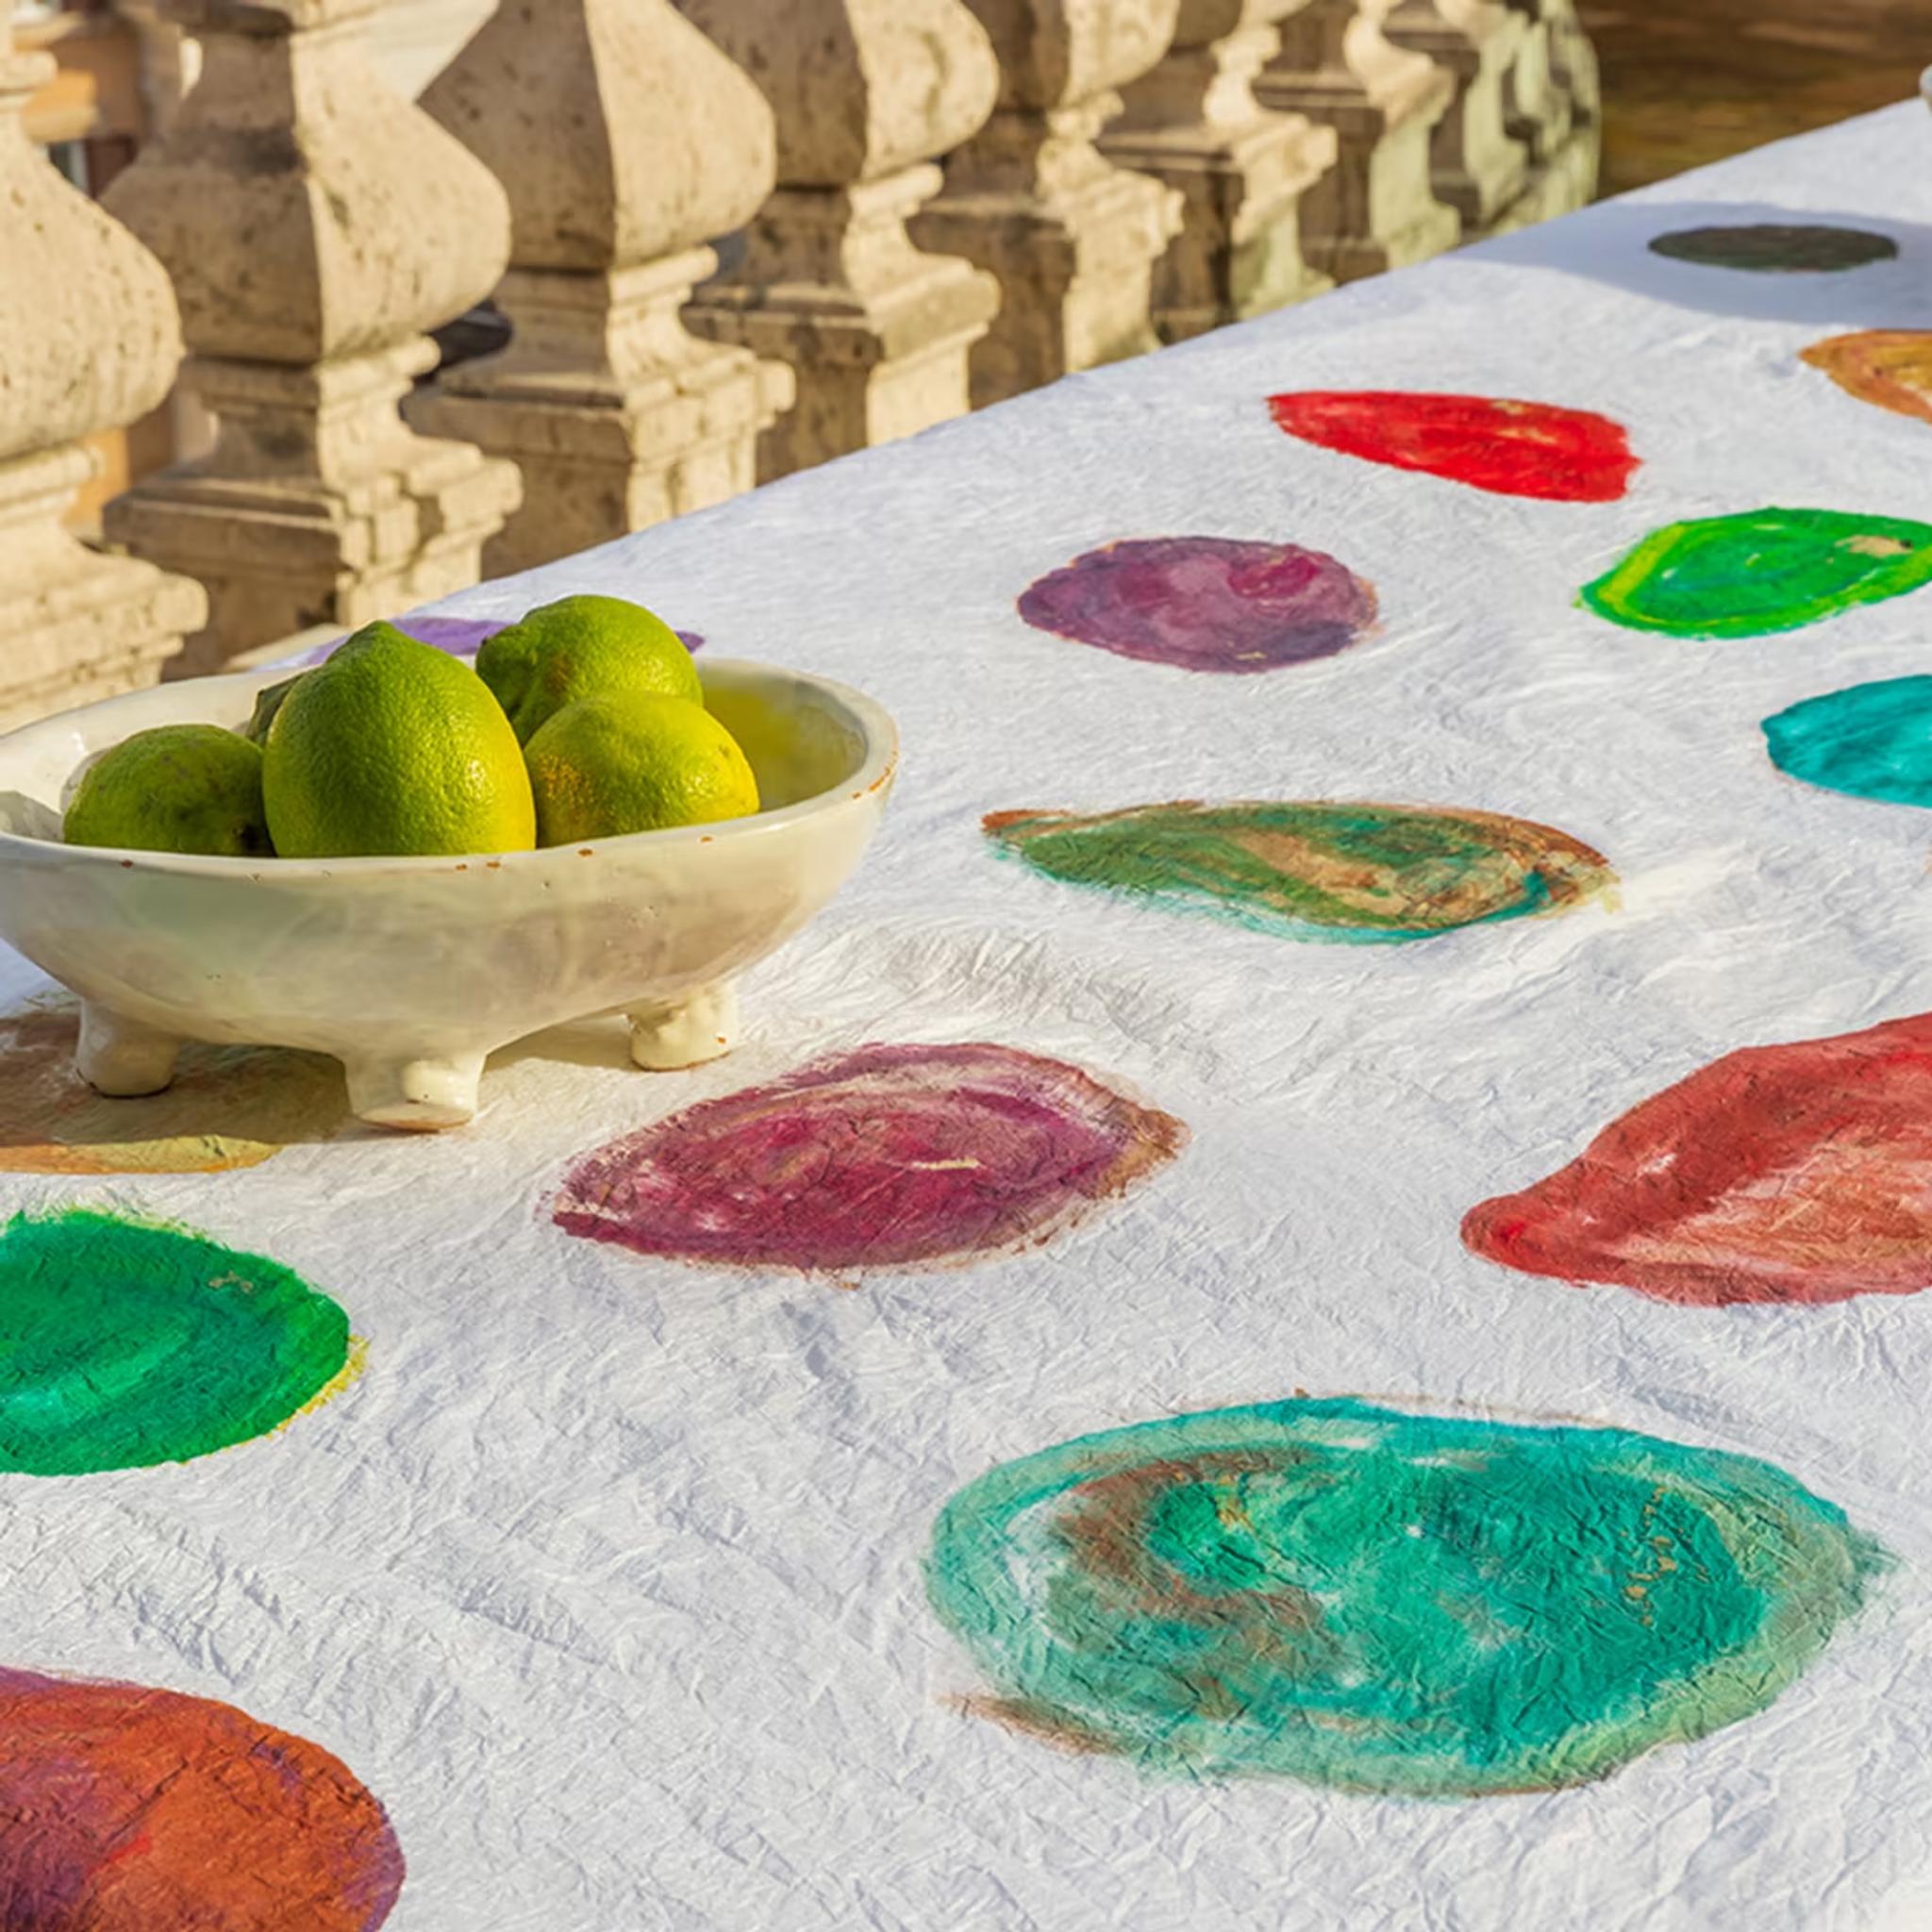 Colorful Tablecloths